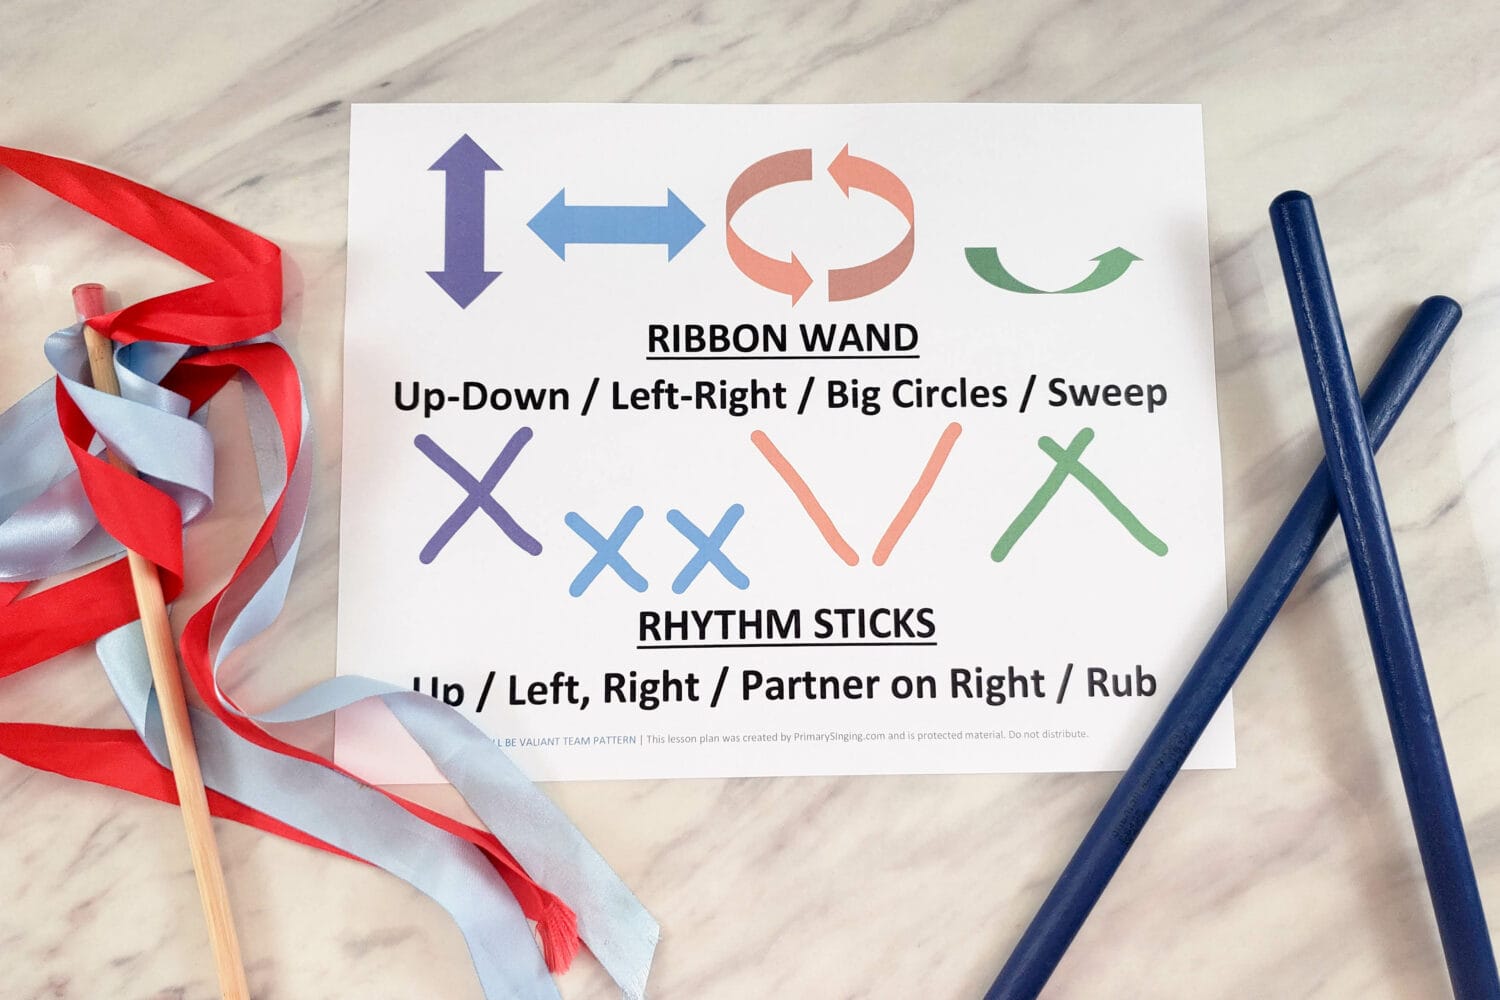 I Will Be Valiant Team Patterns singing time idea using ribbon wands and rhythm sticks for LDS Primary music leaders